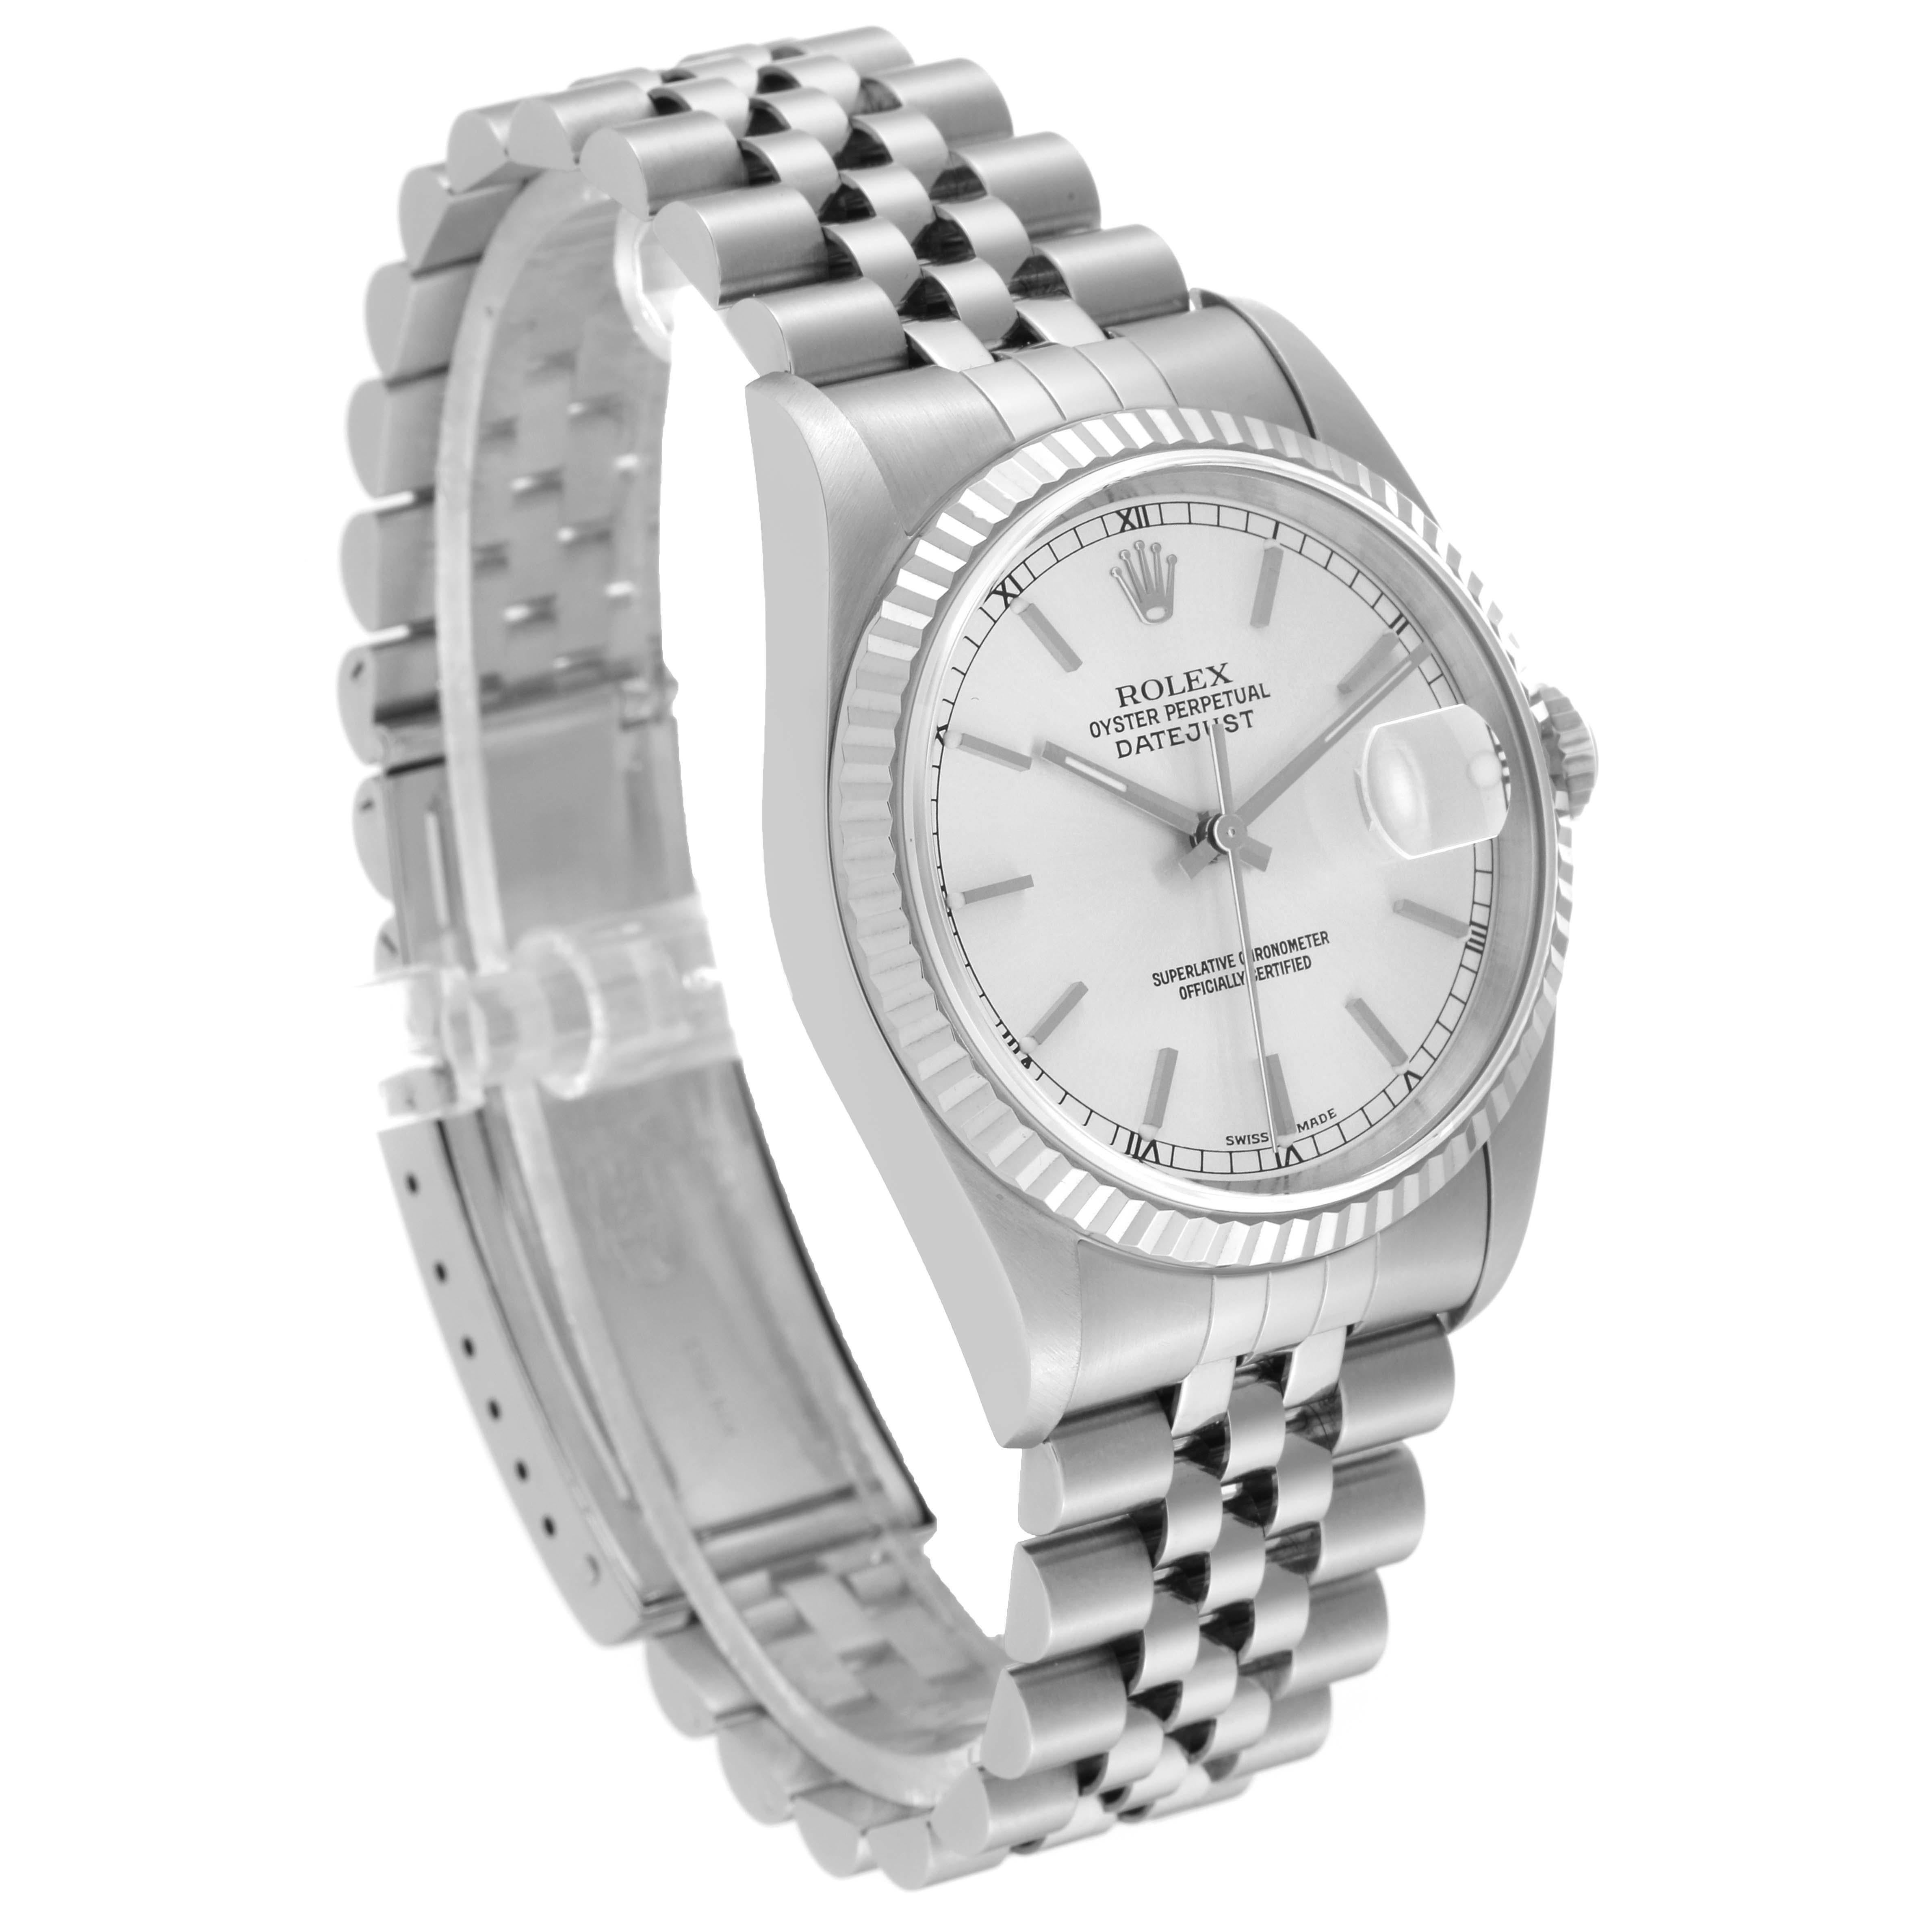 Rolex Datejust Silver Dial Steel White Gold Mens Watch 16234 For Sale 7